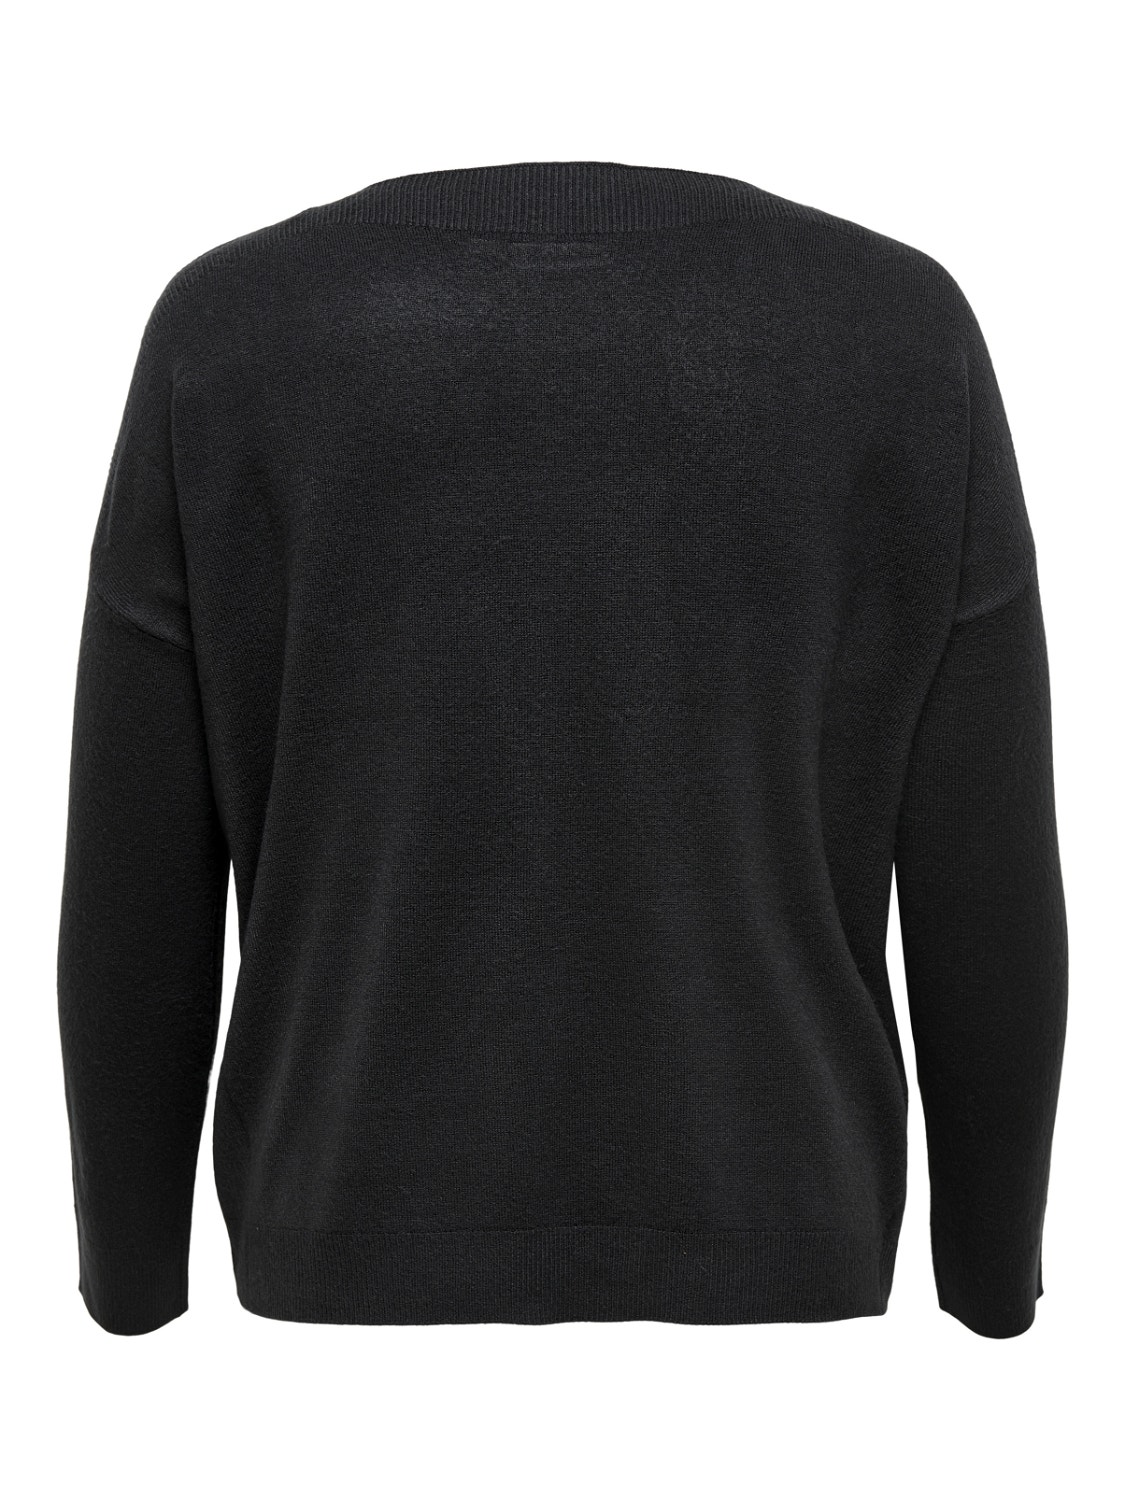 ONLY Curvy boatneck knitted Pullover -Black - 15231779